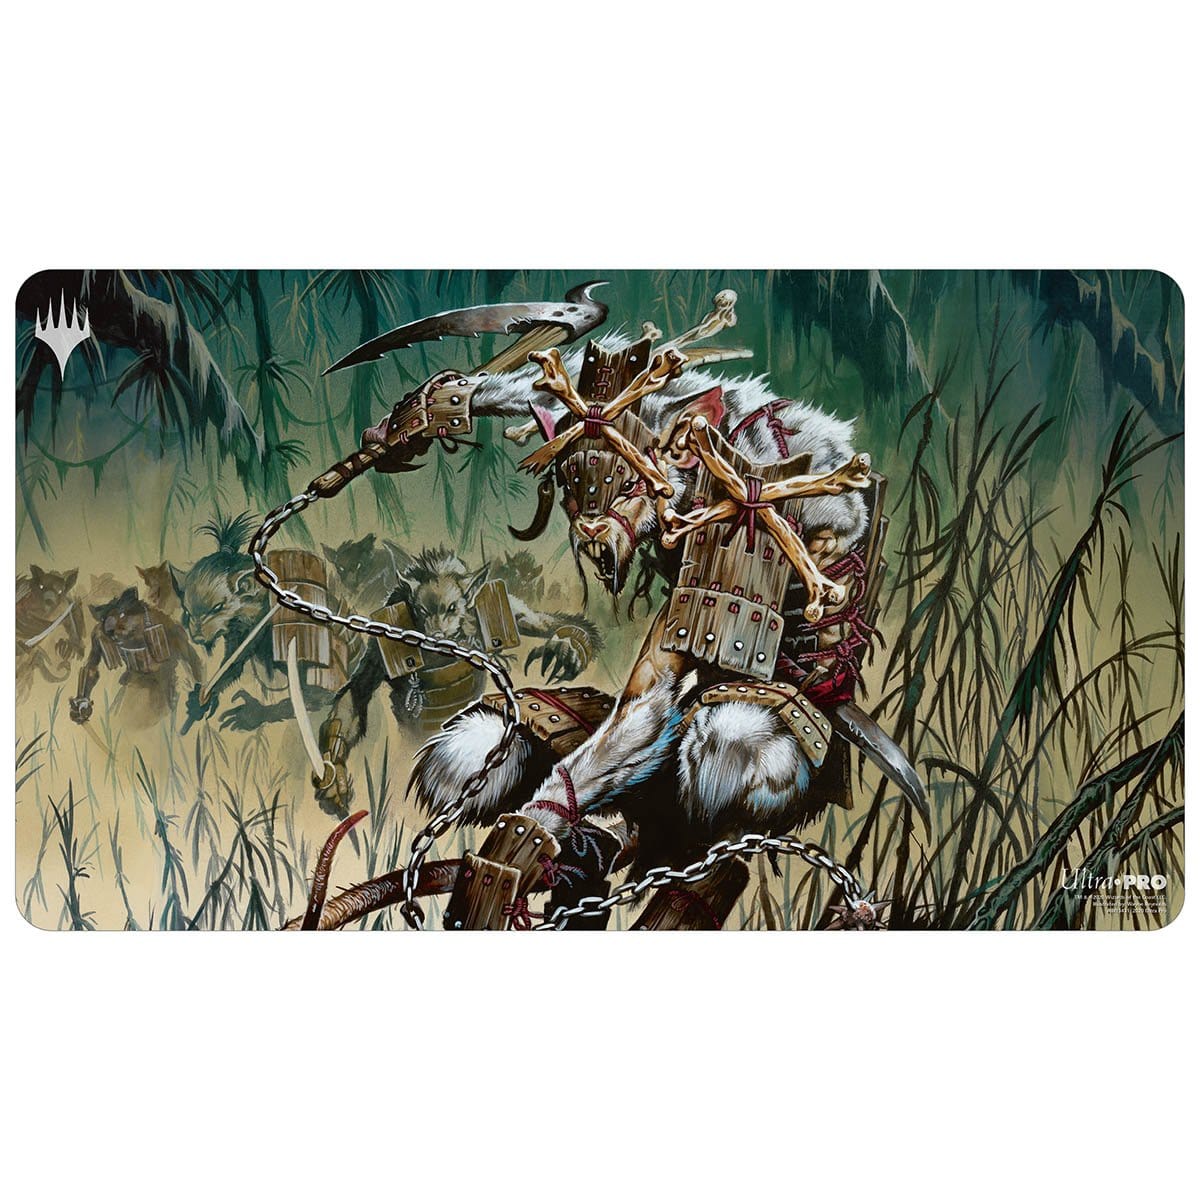 Marrow-Gnawer Playmat - Playmat - Original Magic Art - Accessories for Magic the Gathering and other card games